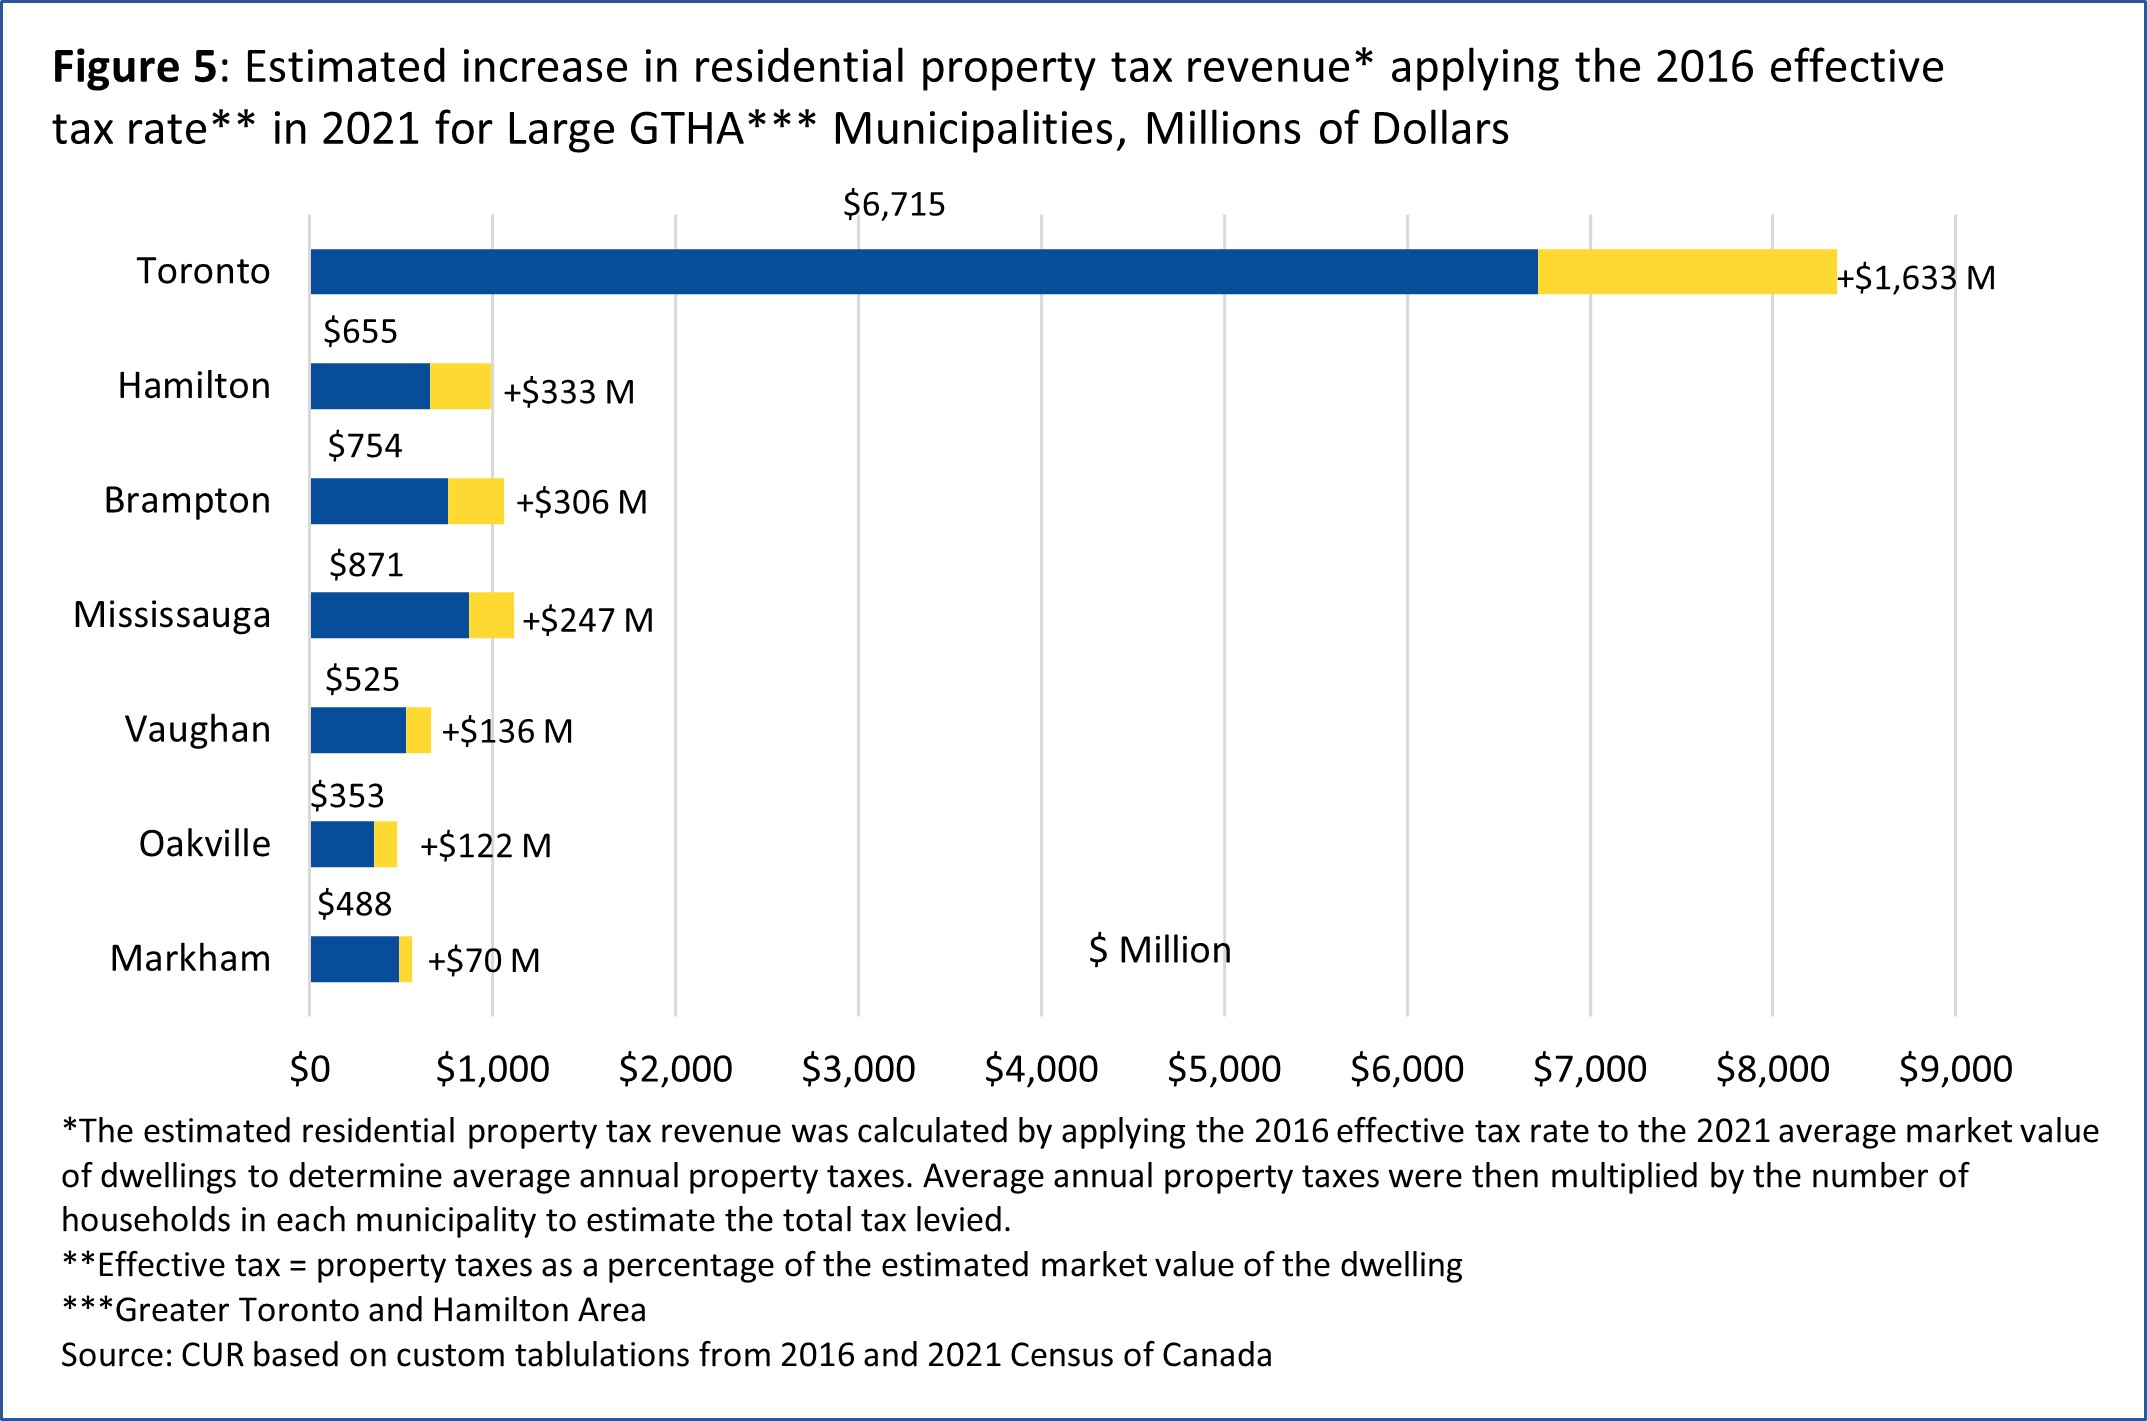 Bar Chart of the estimated increase in residential property tax revenue by applying the 2016 effective rate in 2021 for Large GTHA Municipalities, 2016 and 2021. Source: TMU CUR